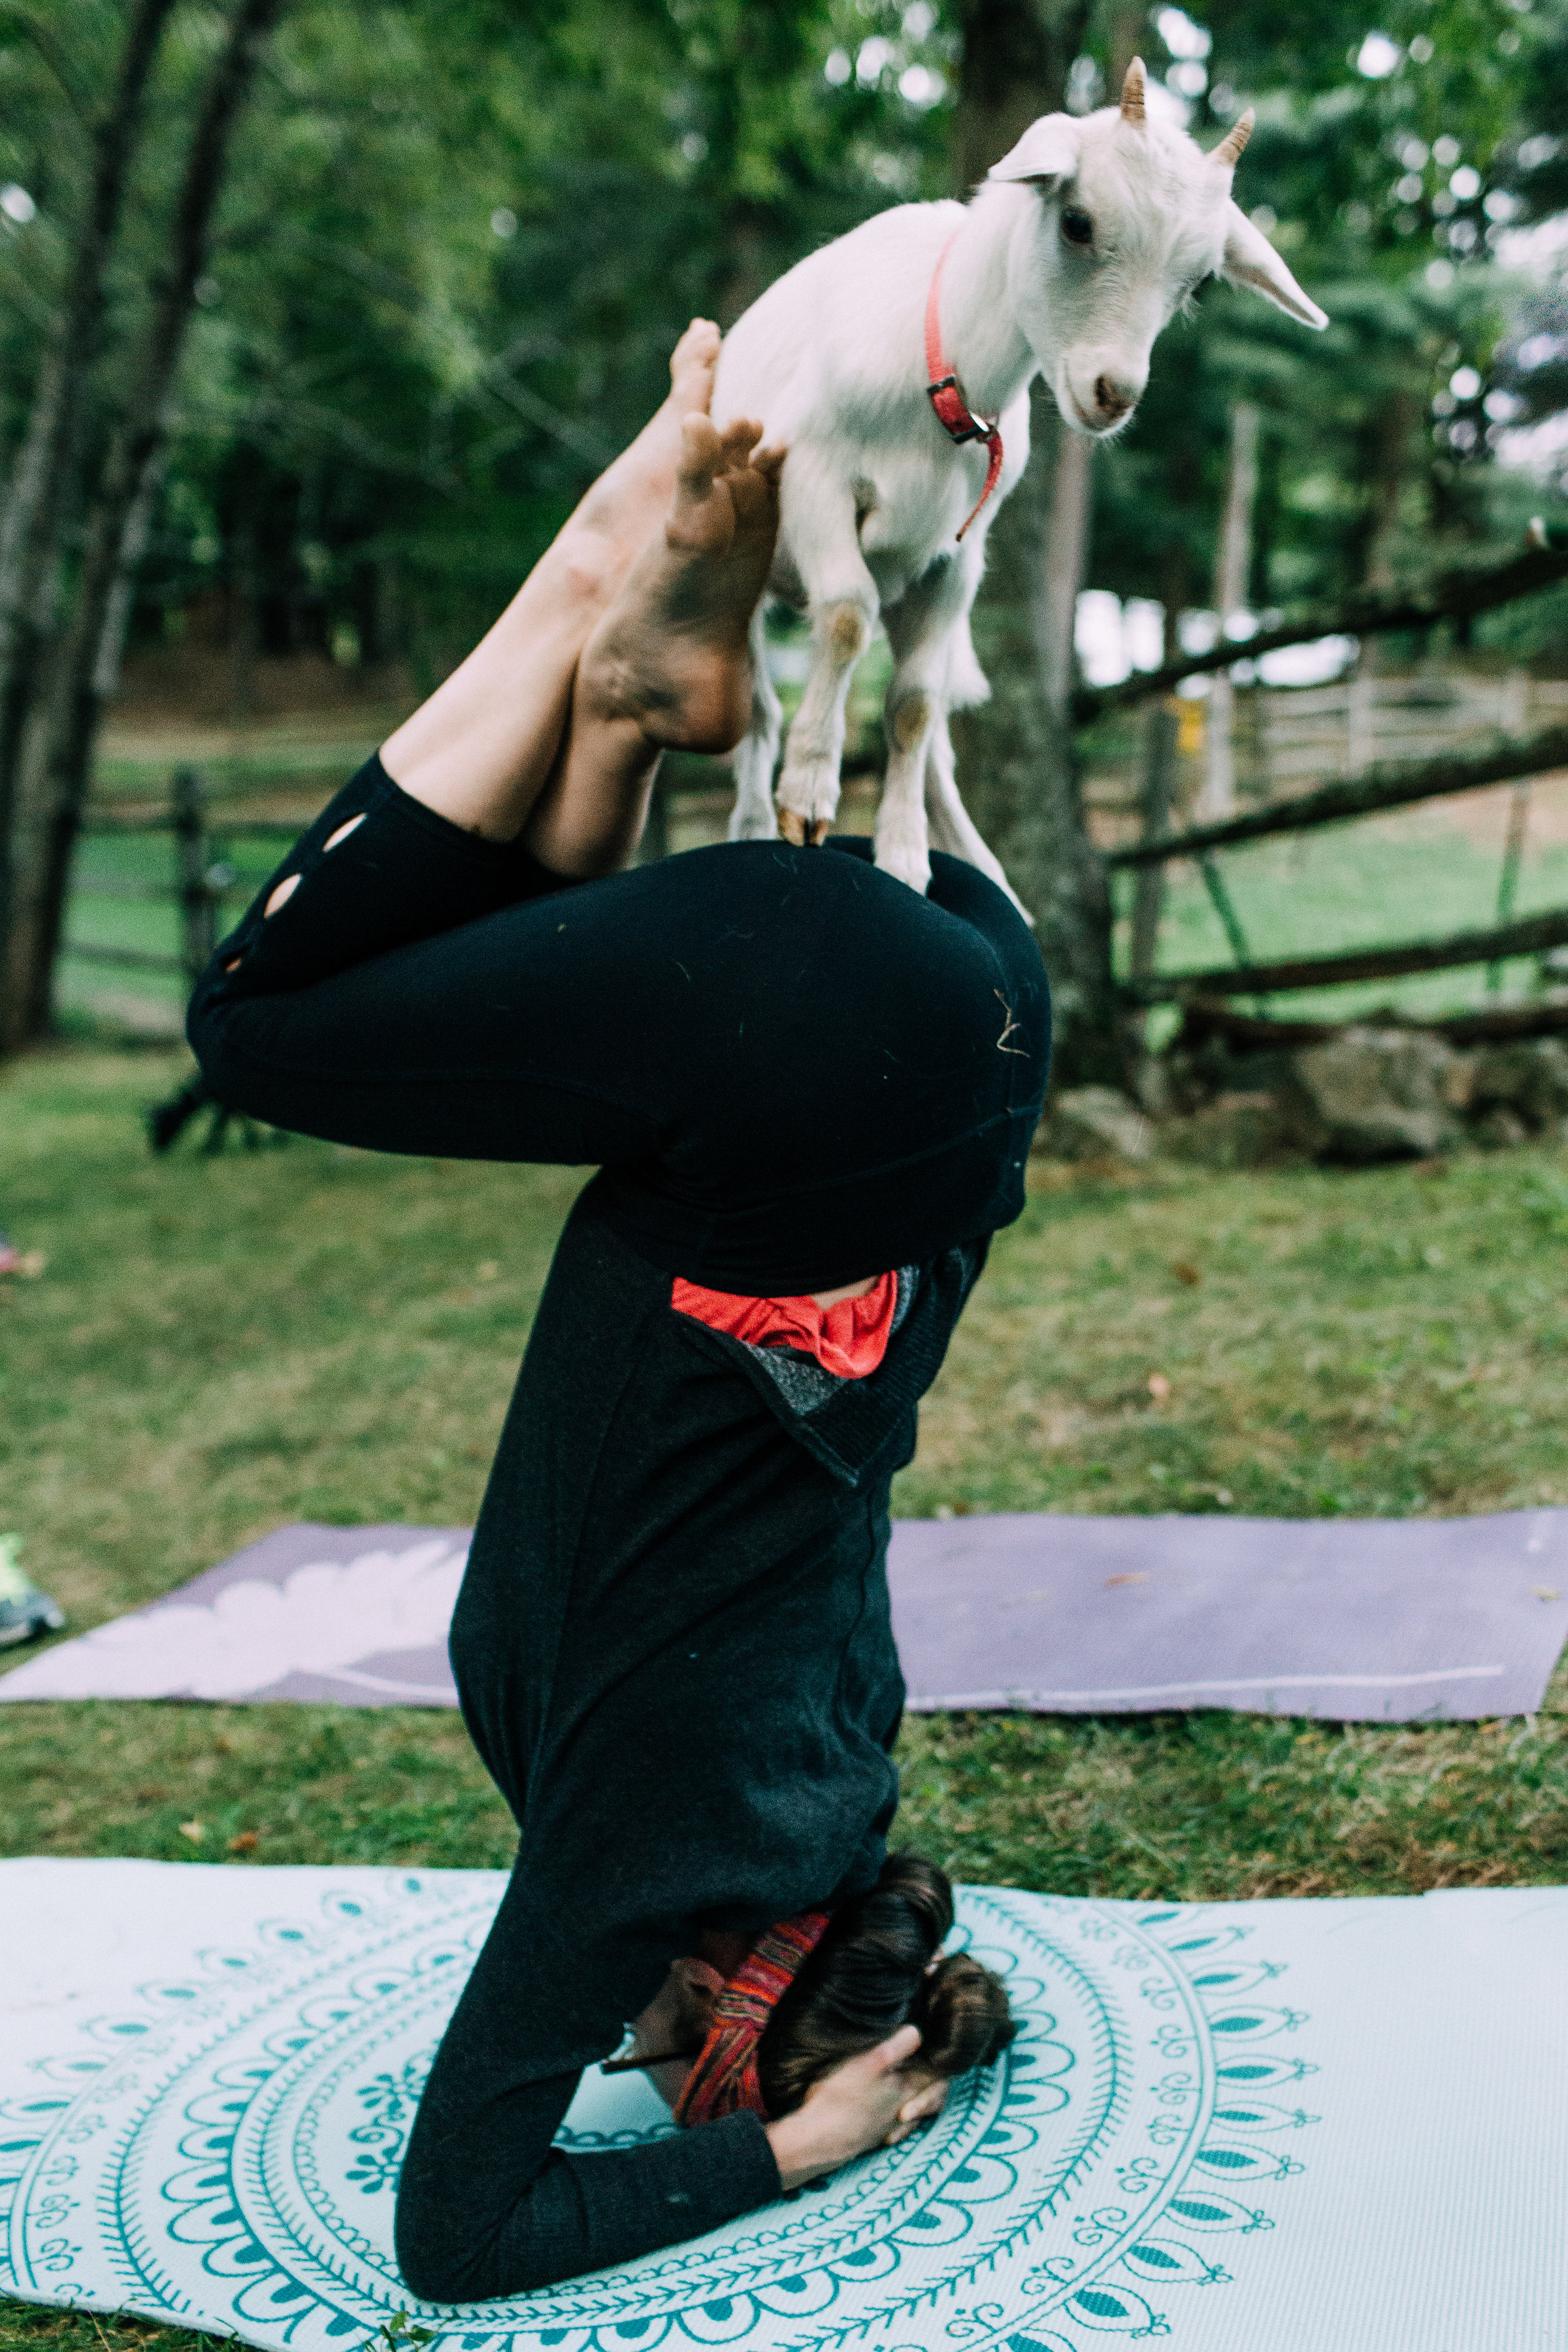 NO KIDDING Yoga with goats? Om… what?